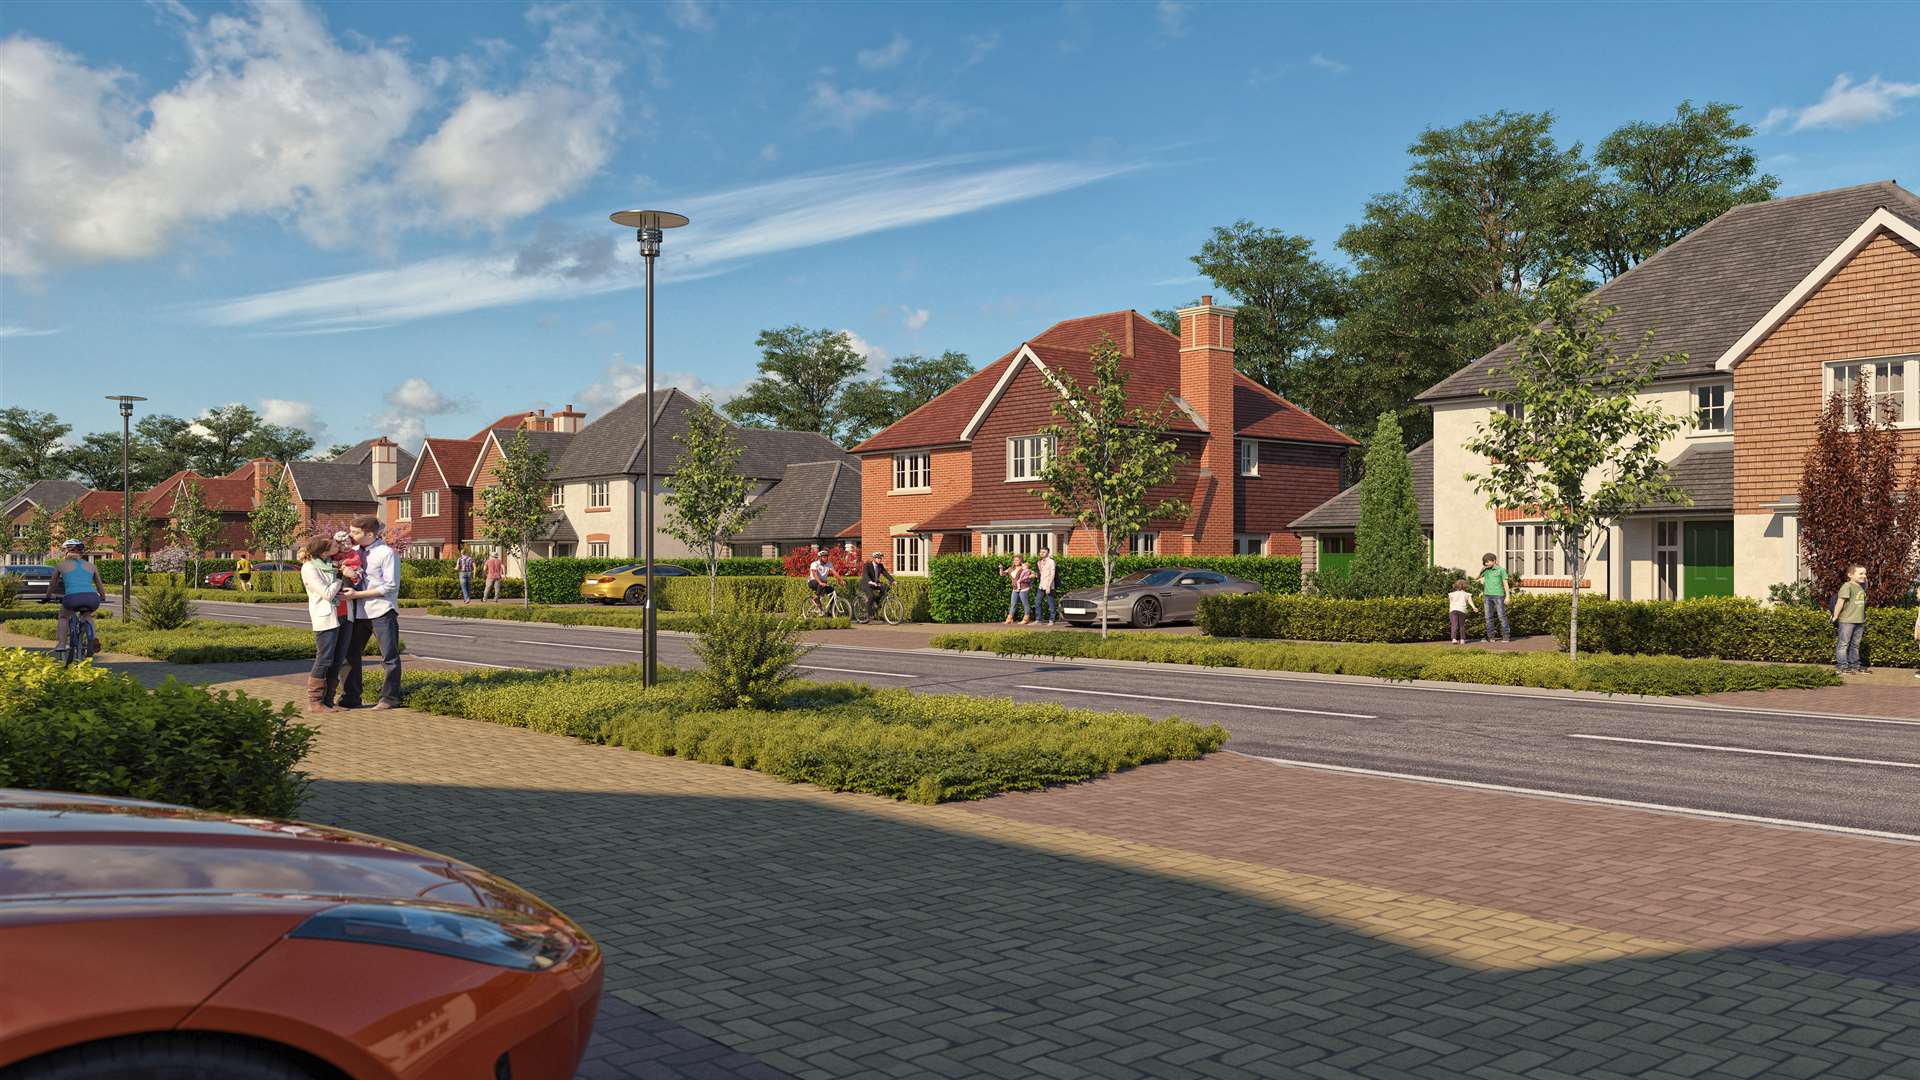 Plans for 400 homes in Thanington have been submitted to the council